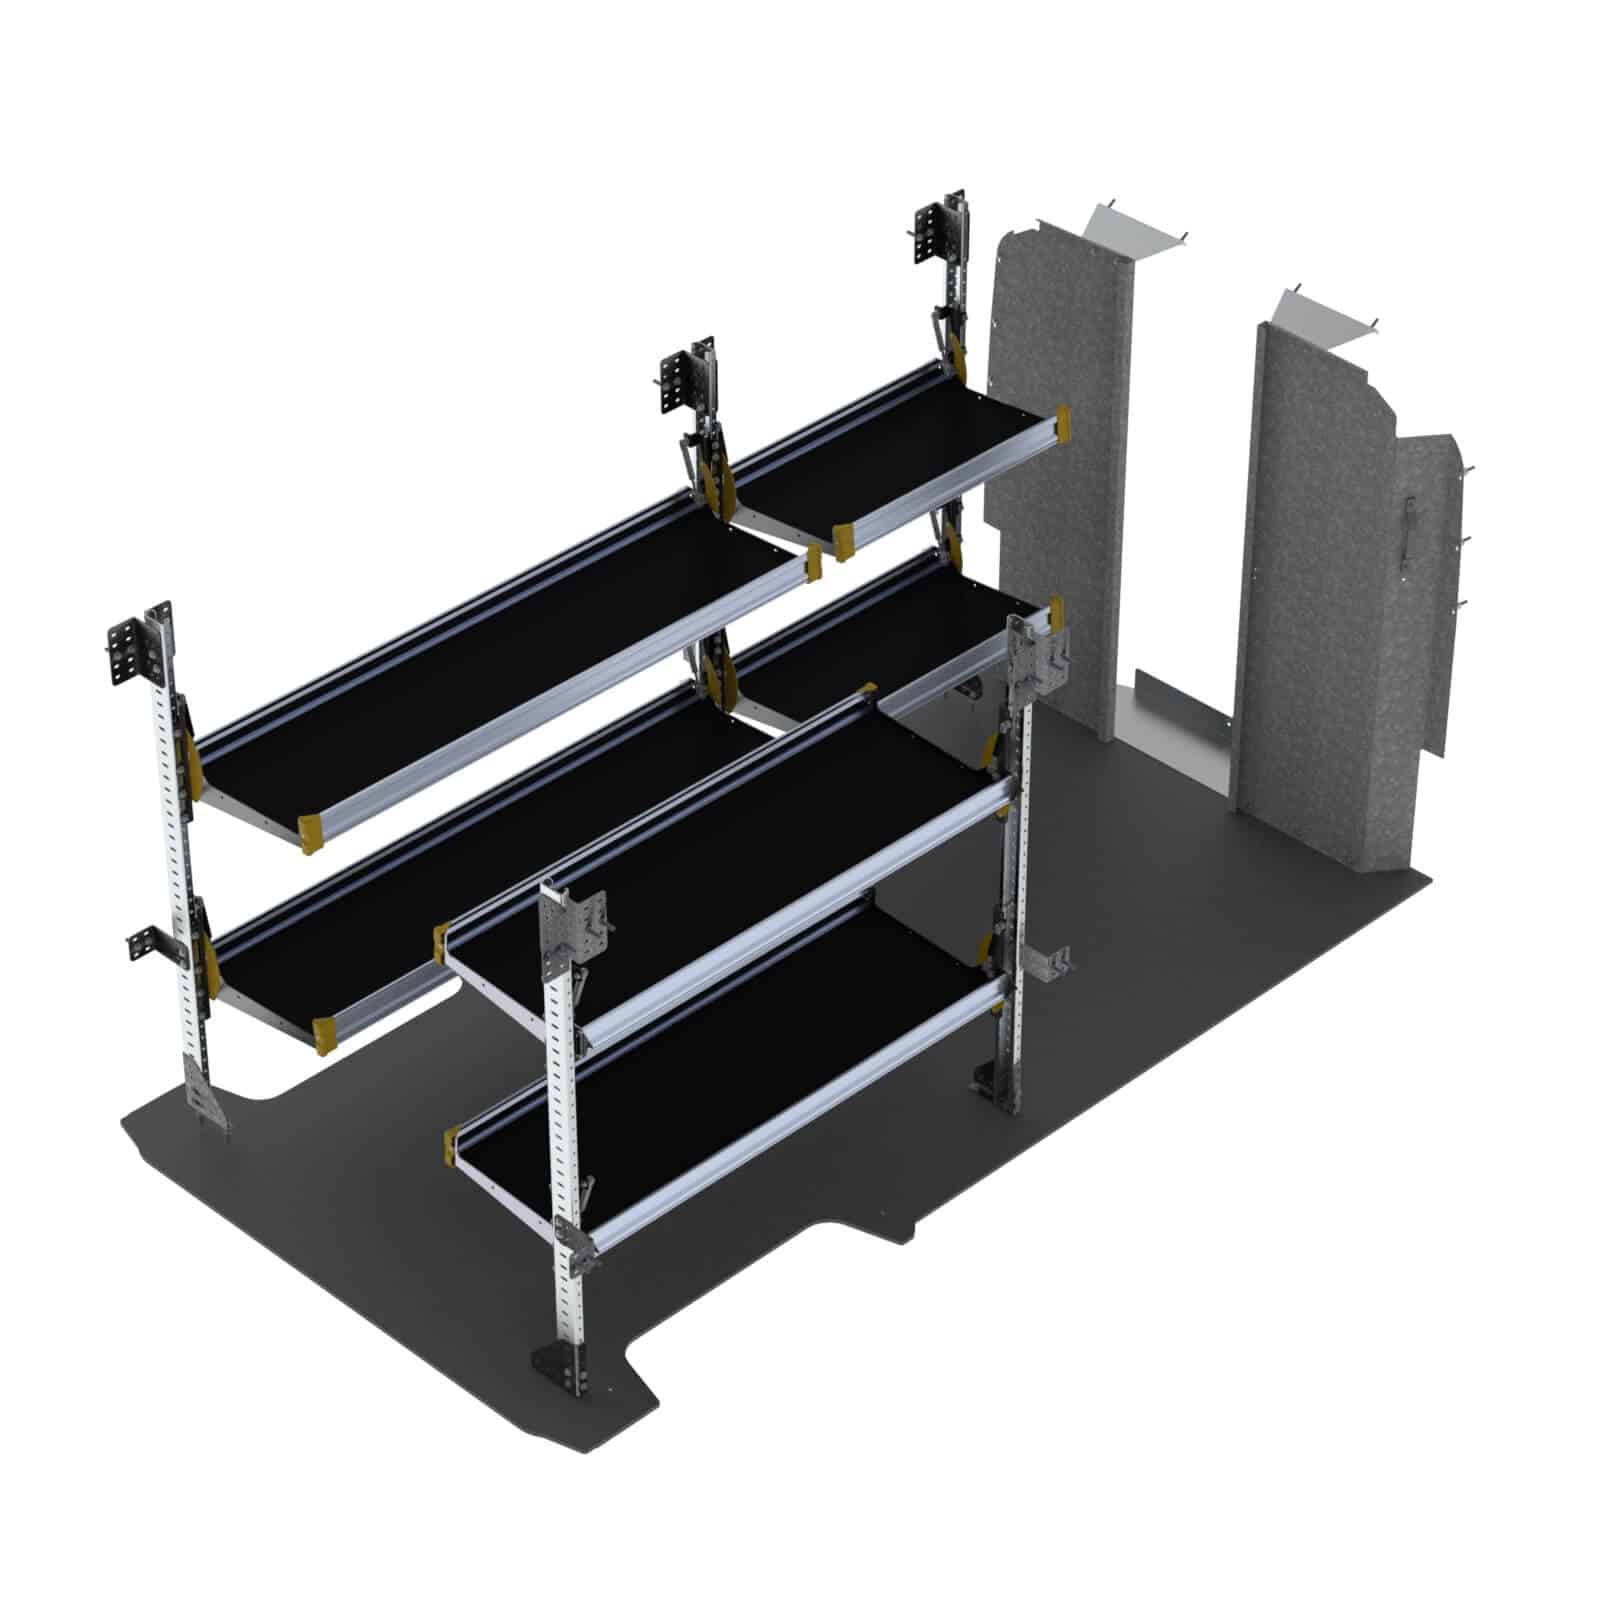 Delivery Van Shelving Package Ram, Dodge Promaster Shelving Systems